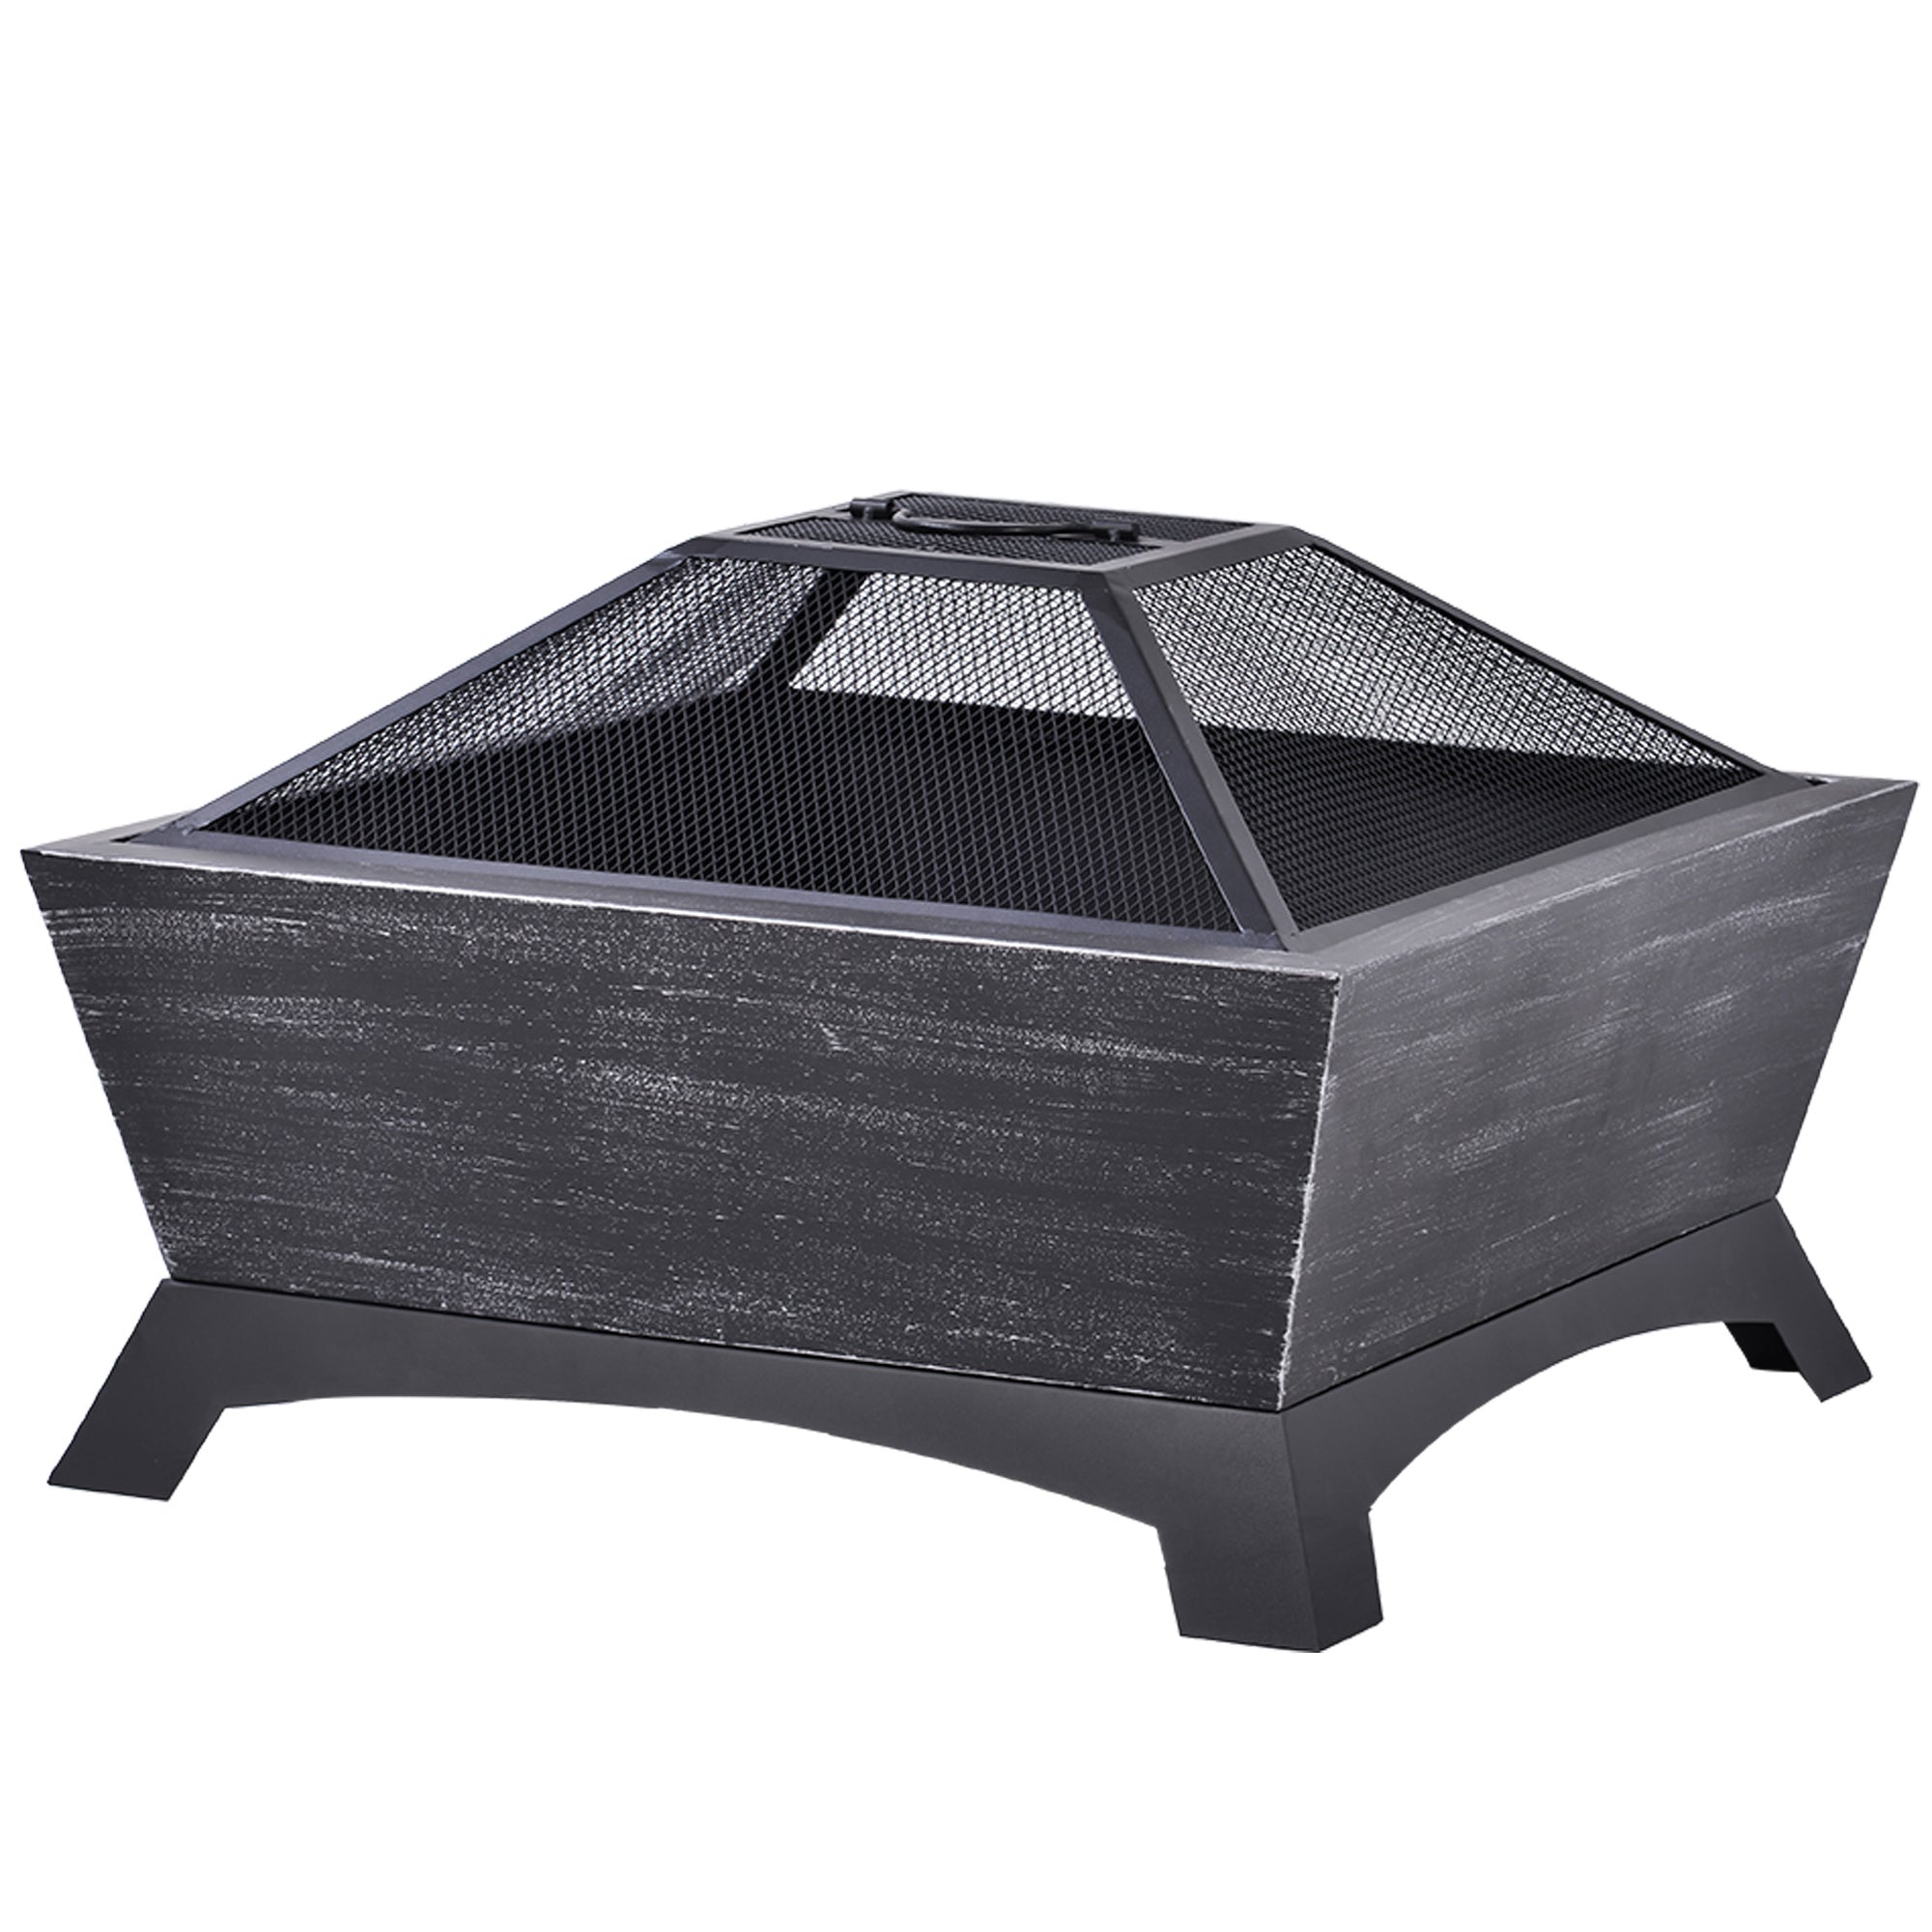 Free shipping Quality Steel Fire Pit with Log Poker, Mesh Screen for Outdoor Living, Family Use, Dark Gray